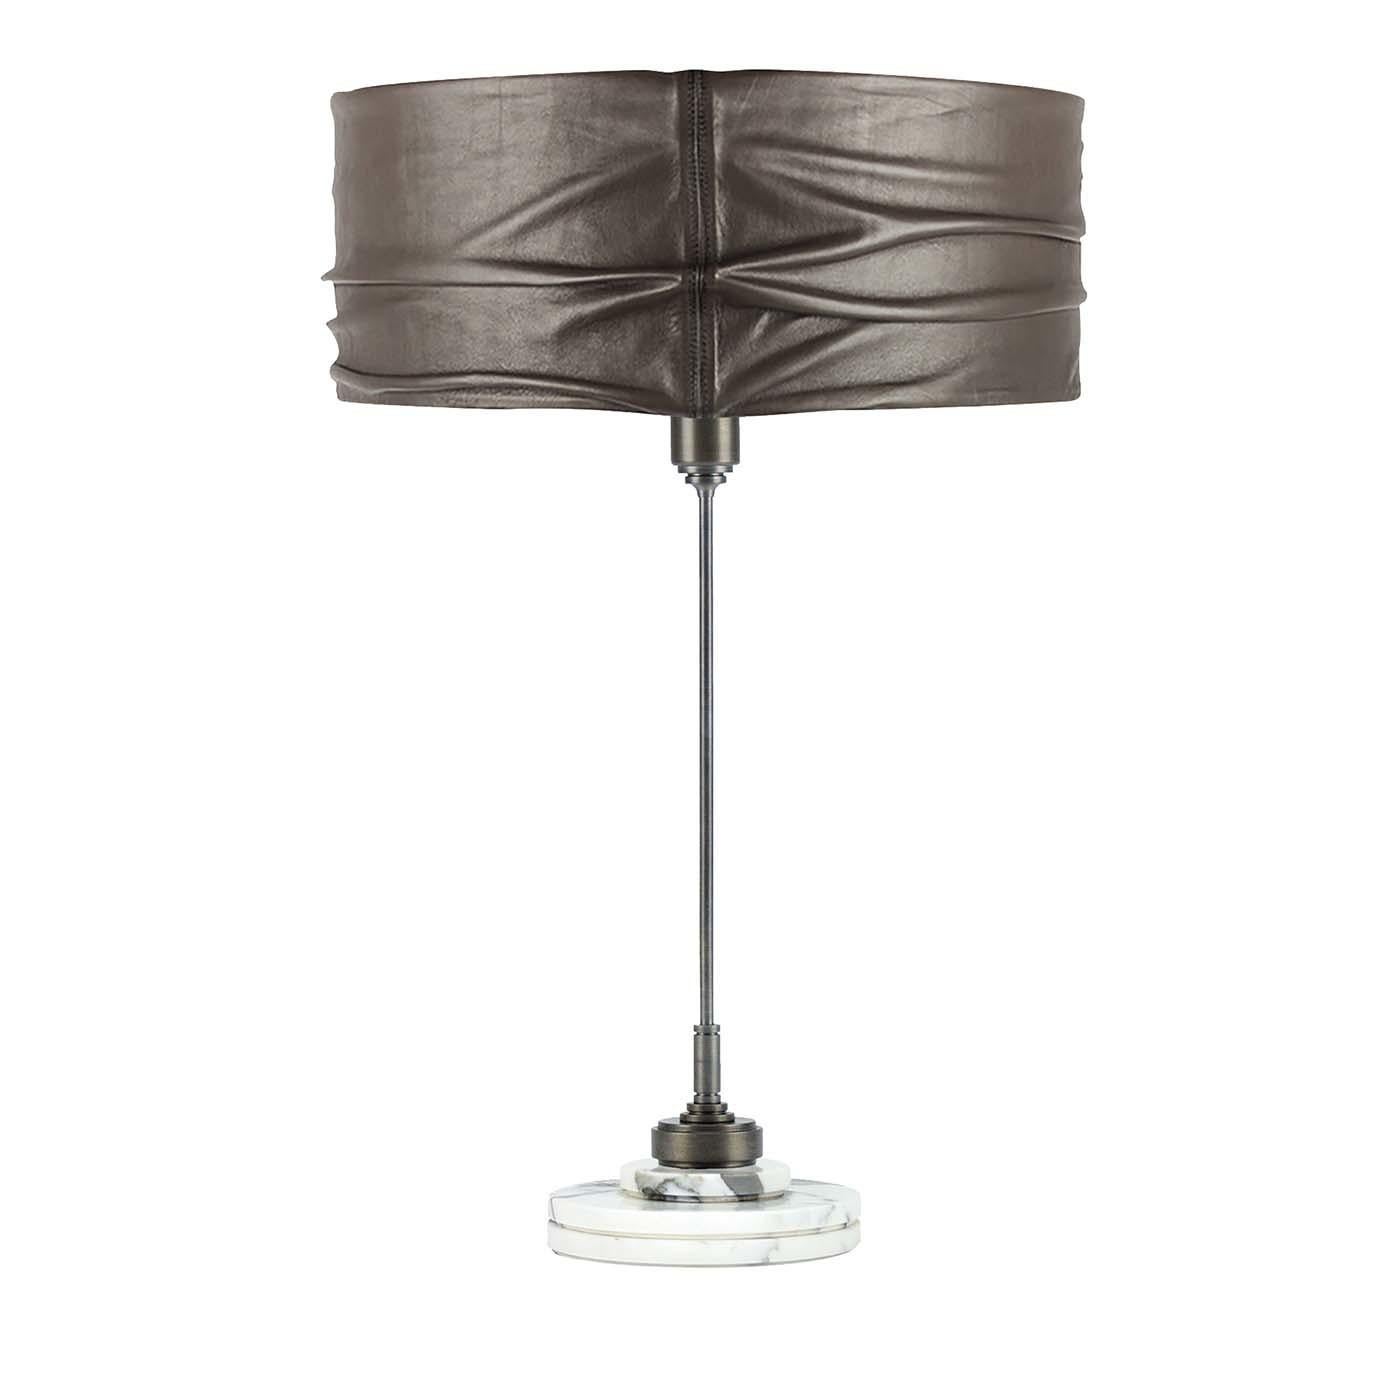 Showcasing an exquisite combination of materials and textures, this table lamp features a round base of Carrara Arabescato marble whose exquisite pattern of swirling whites and grays complements the eye-catching ruched texture of the gray leather